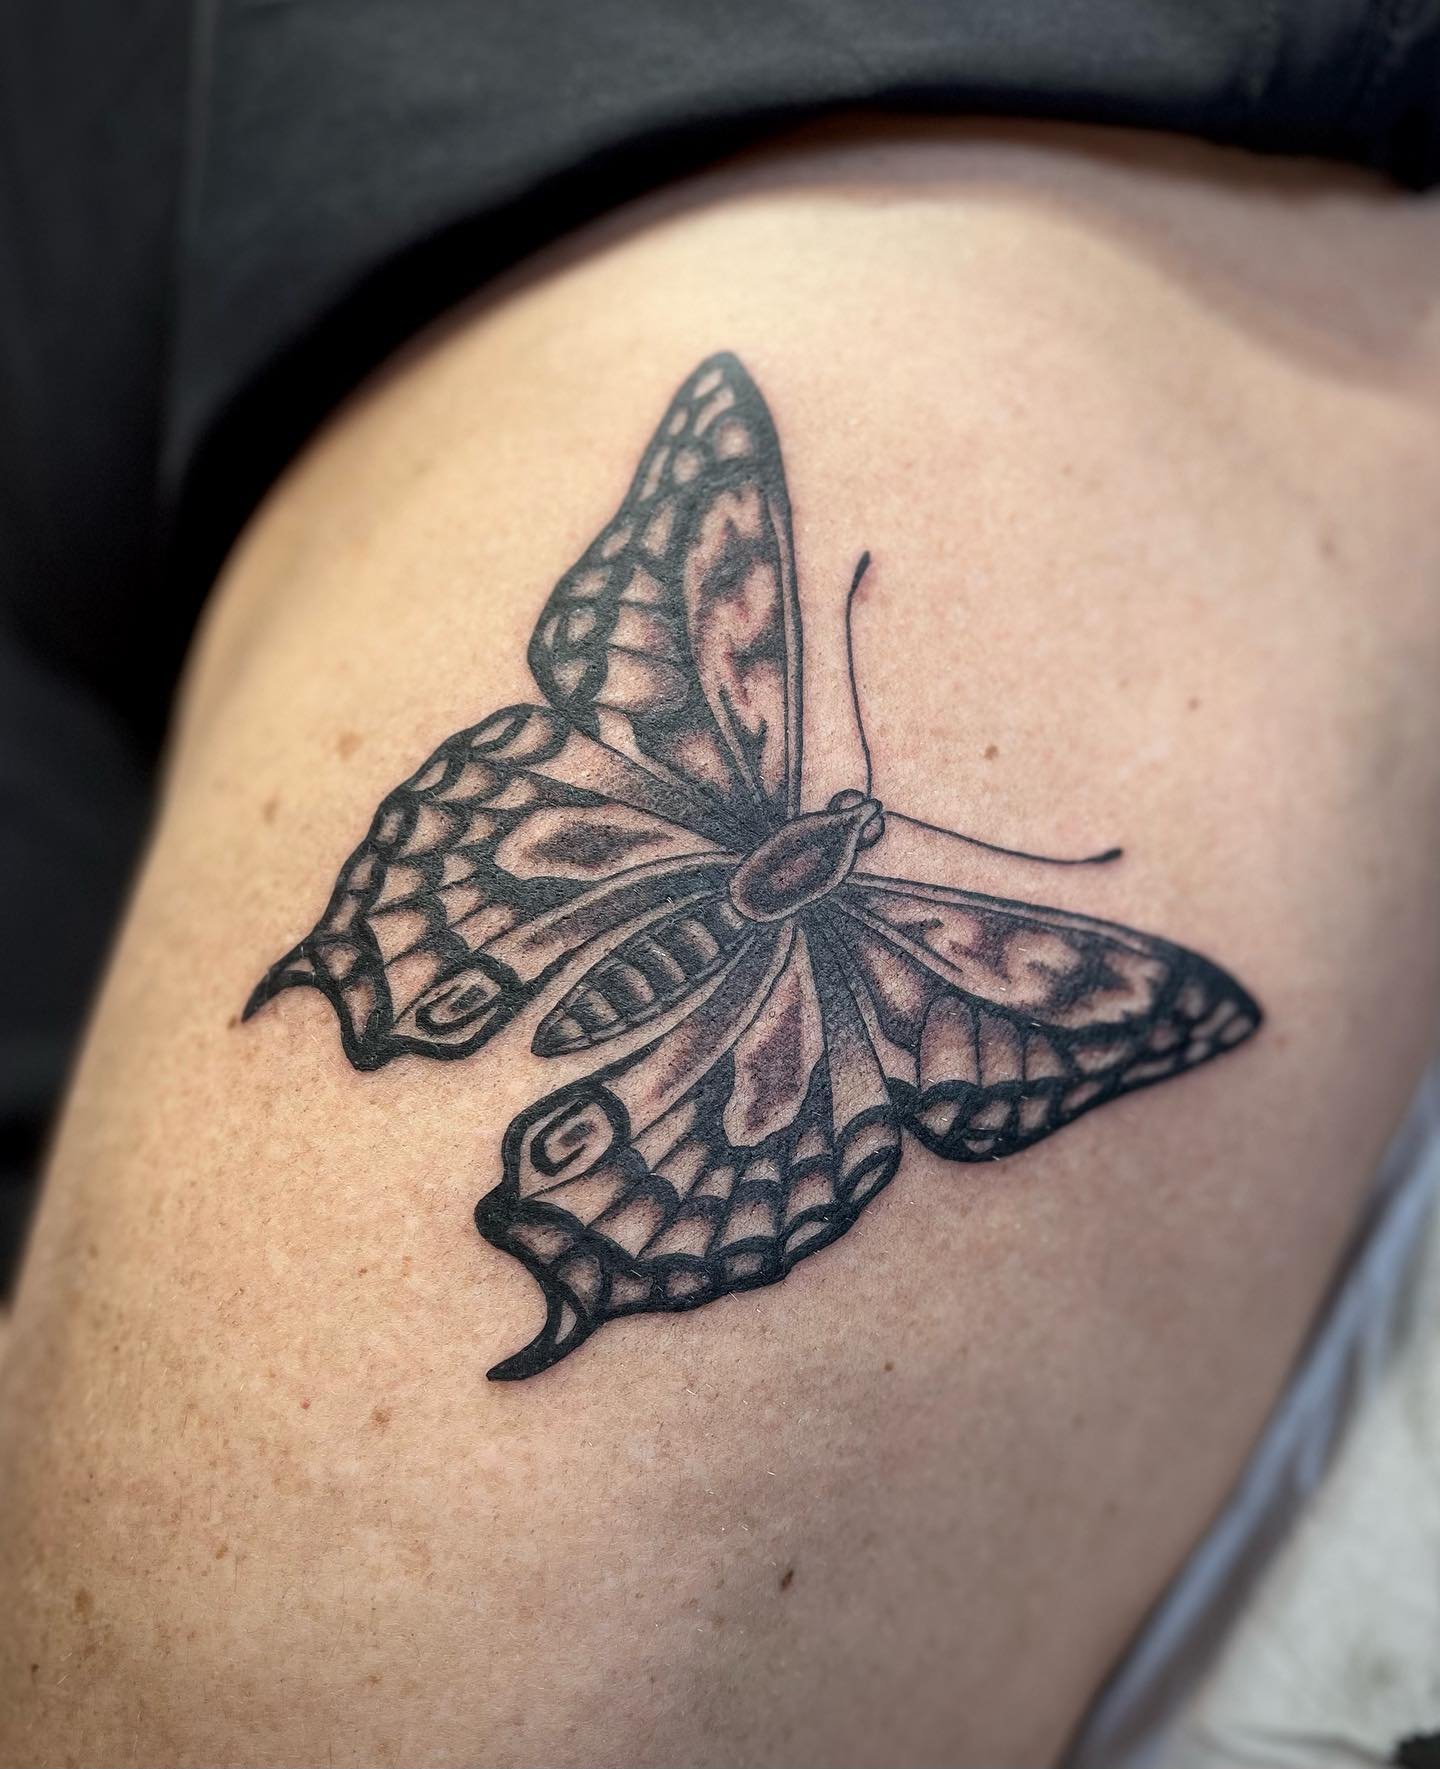 Butterfly for Josephine this week . Thanks again 🙏🏻 for enquiries DM or email rocksteadytattoouk@gmail.com